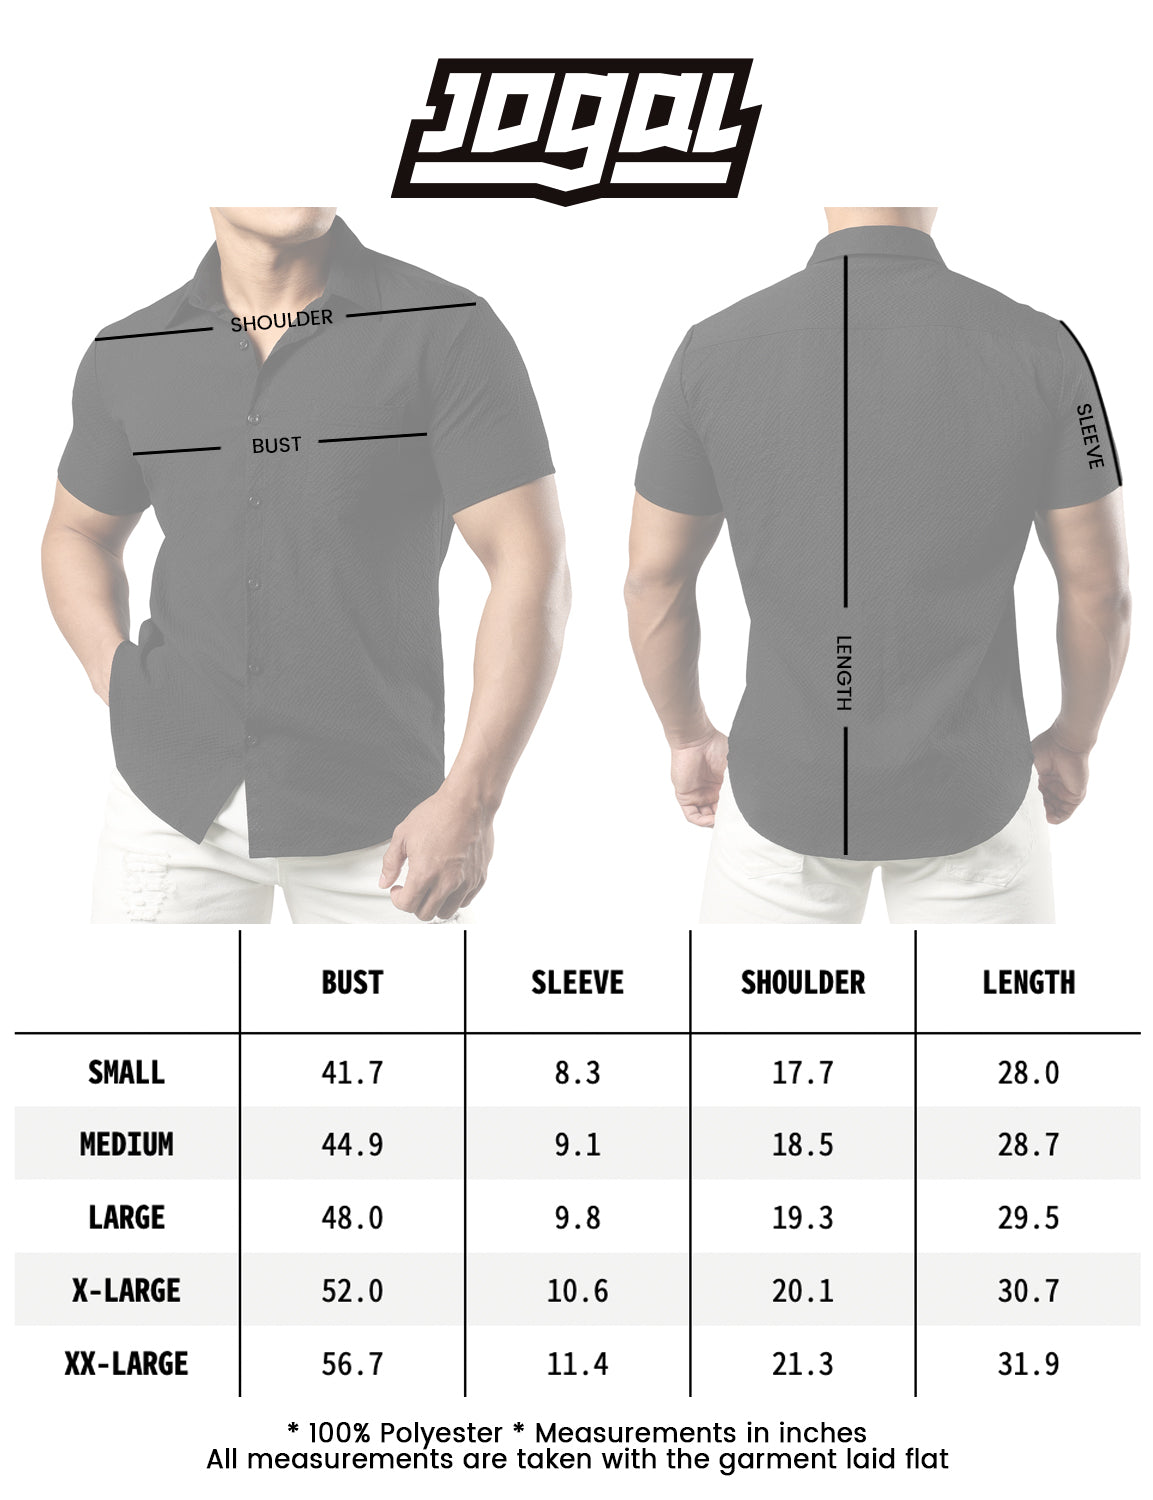 JOGAL Men's Muscle Fit Textured Dress Shirts Short Sleeve Casual Button Down Athletic Fit Shirt with Pocket